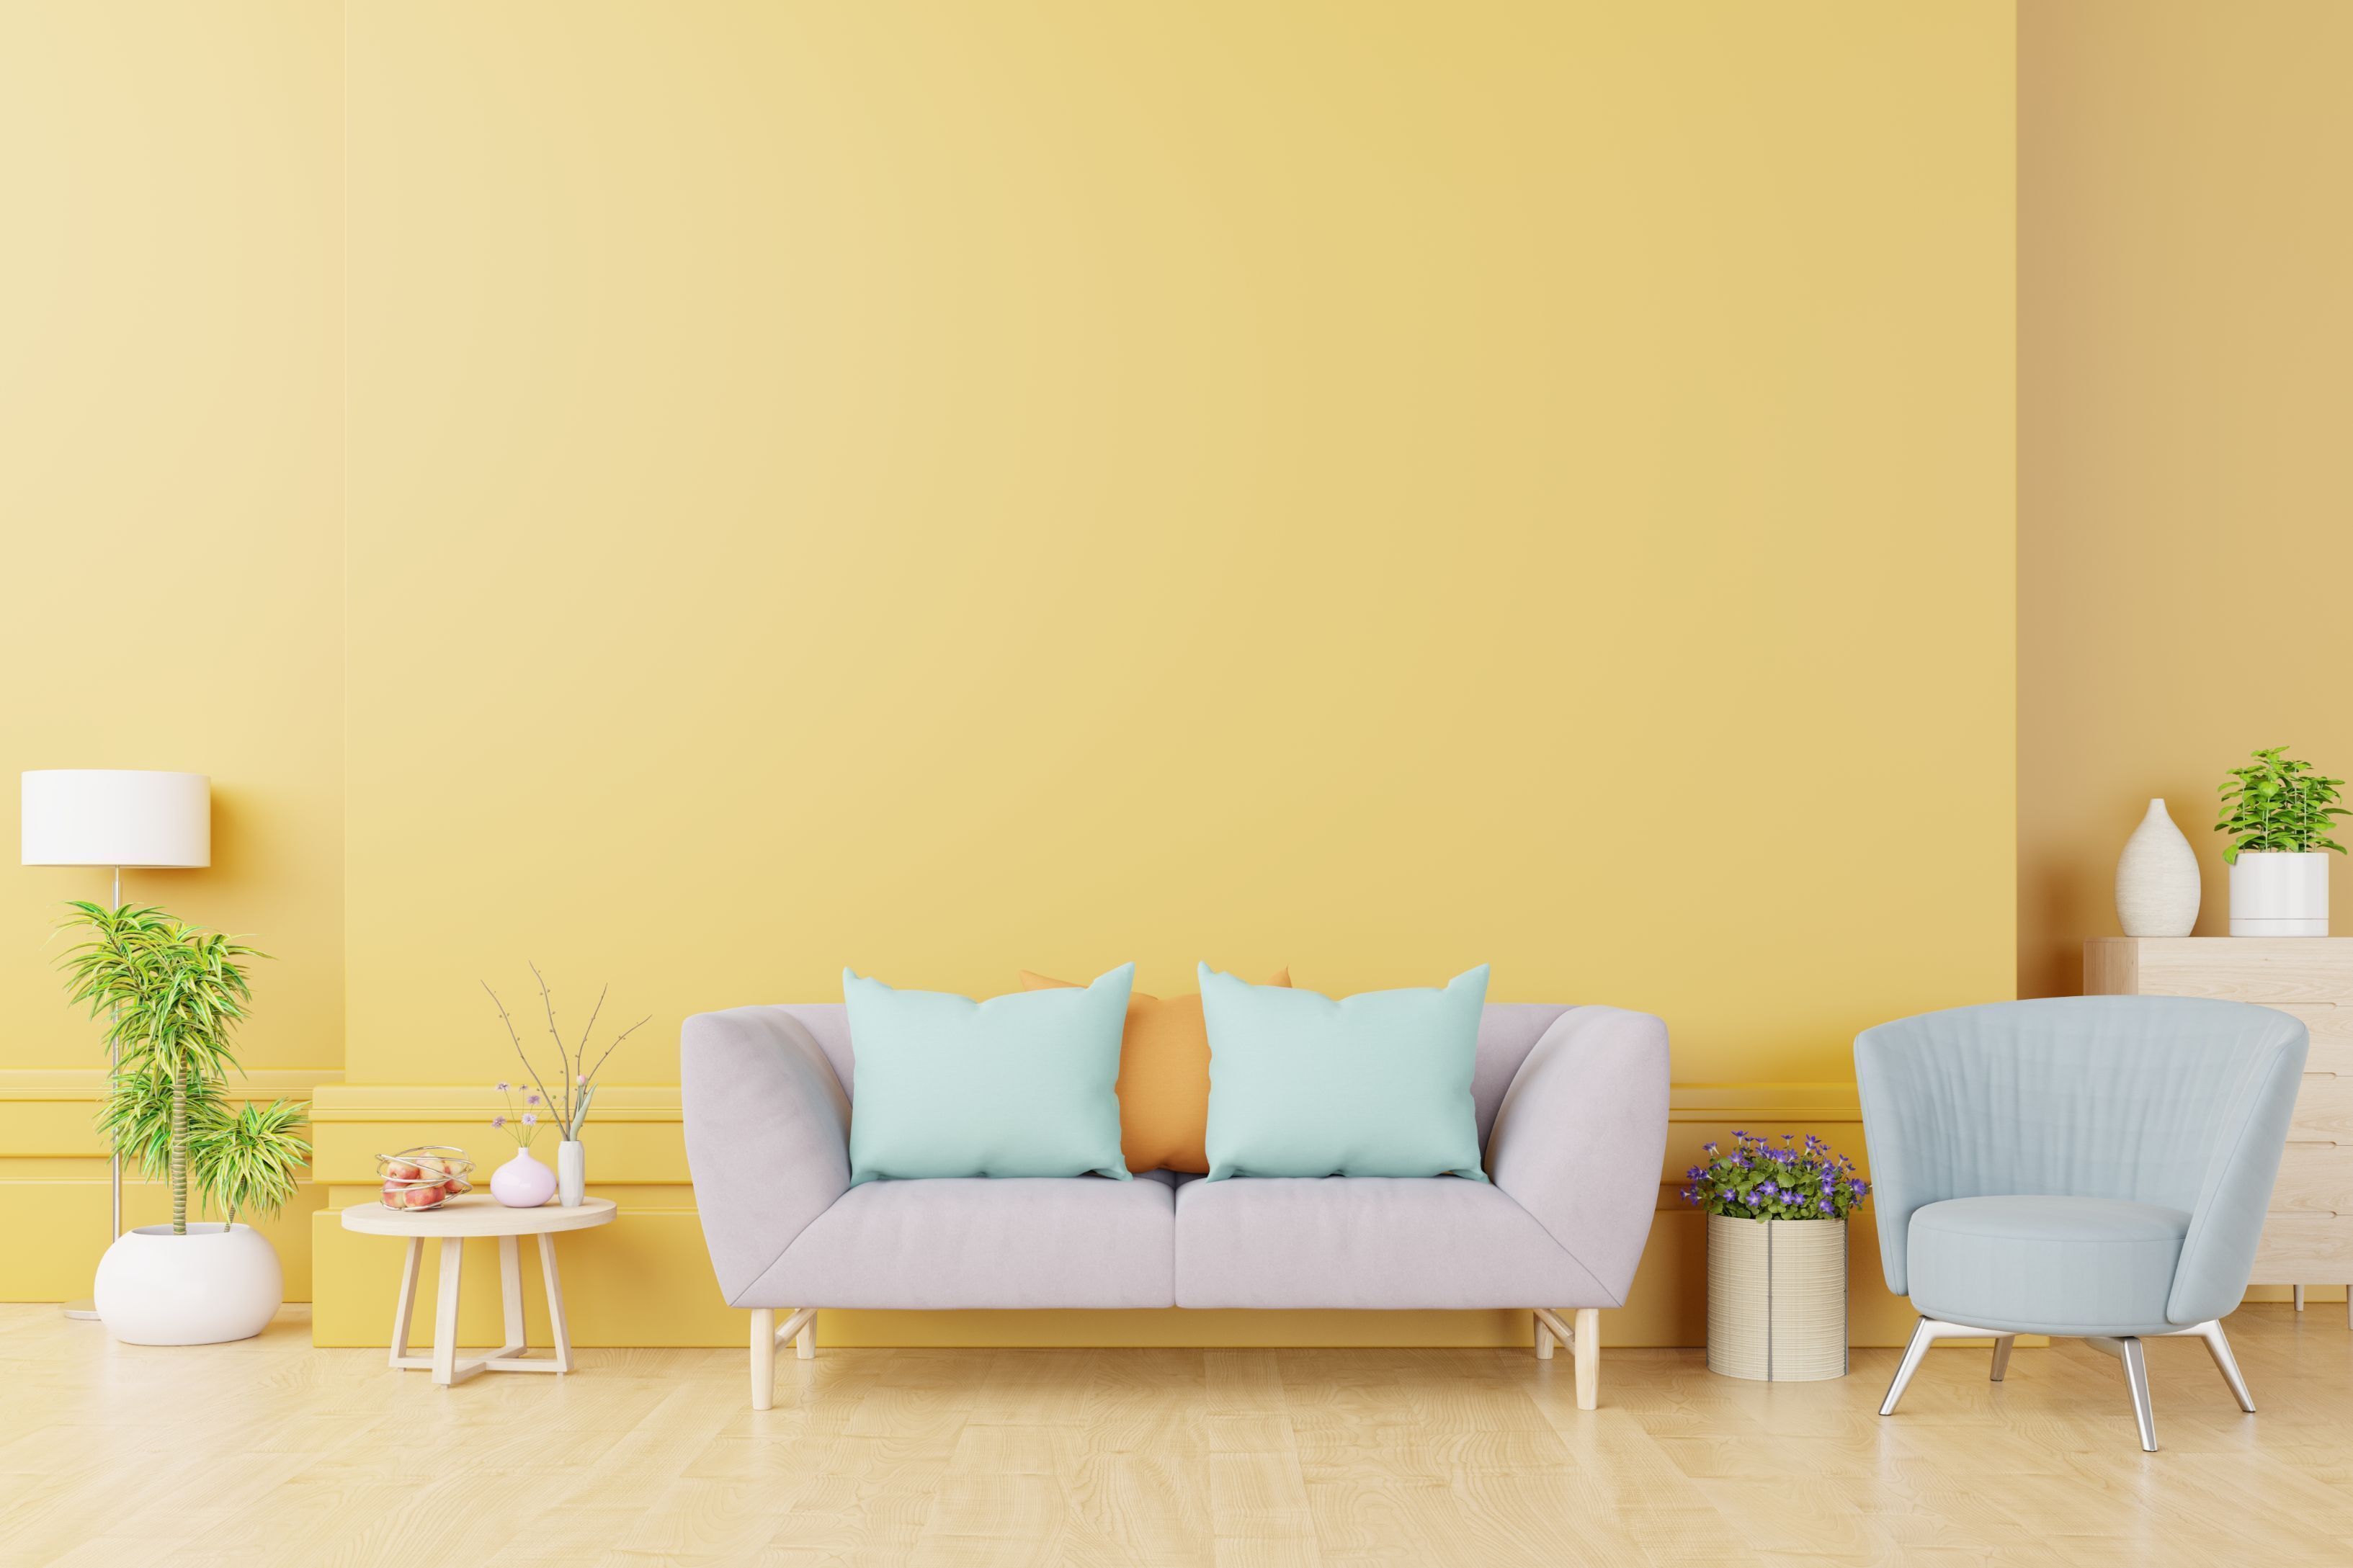 Best Colour Combination for Living Room Wall, House Wall, Interior Wall  Color Ideas 2021 @Dhiman Hardware Store | Best Colour Combination for  Living Room Wall, House Wall, Interior Wall Color Ideas 2021 @